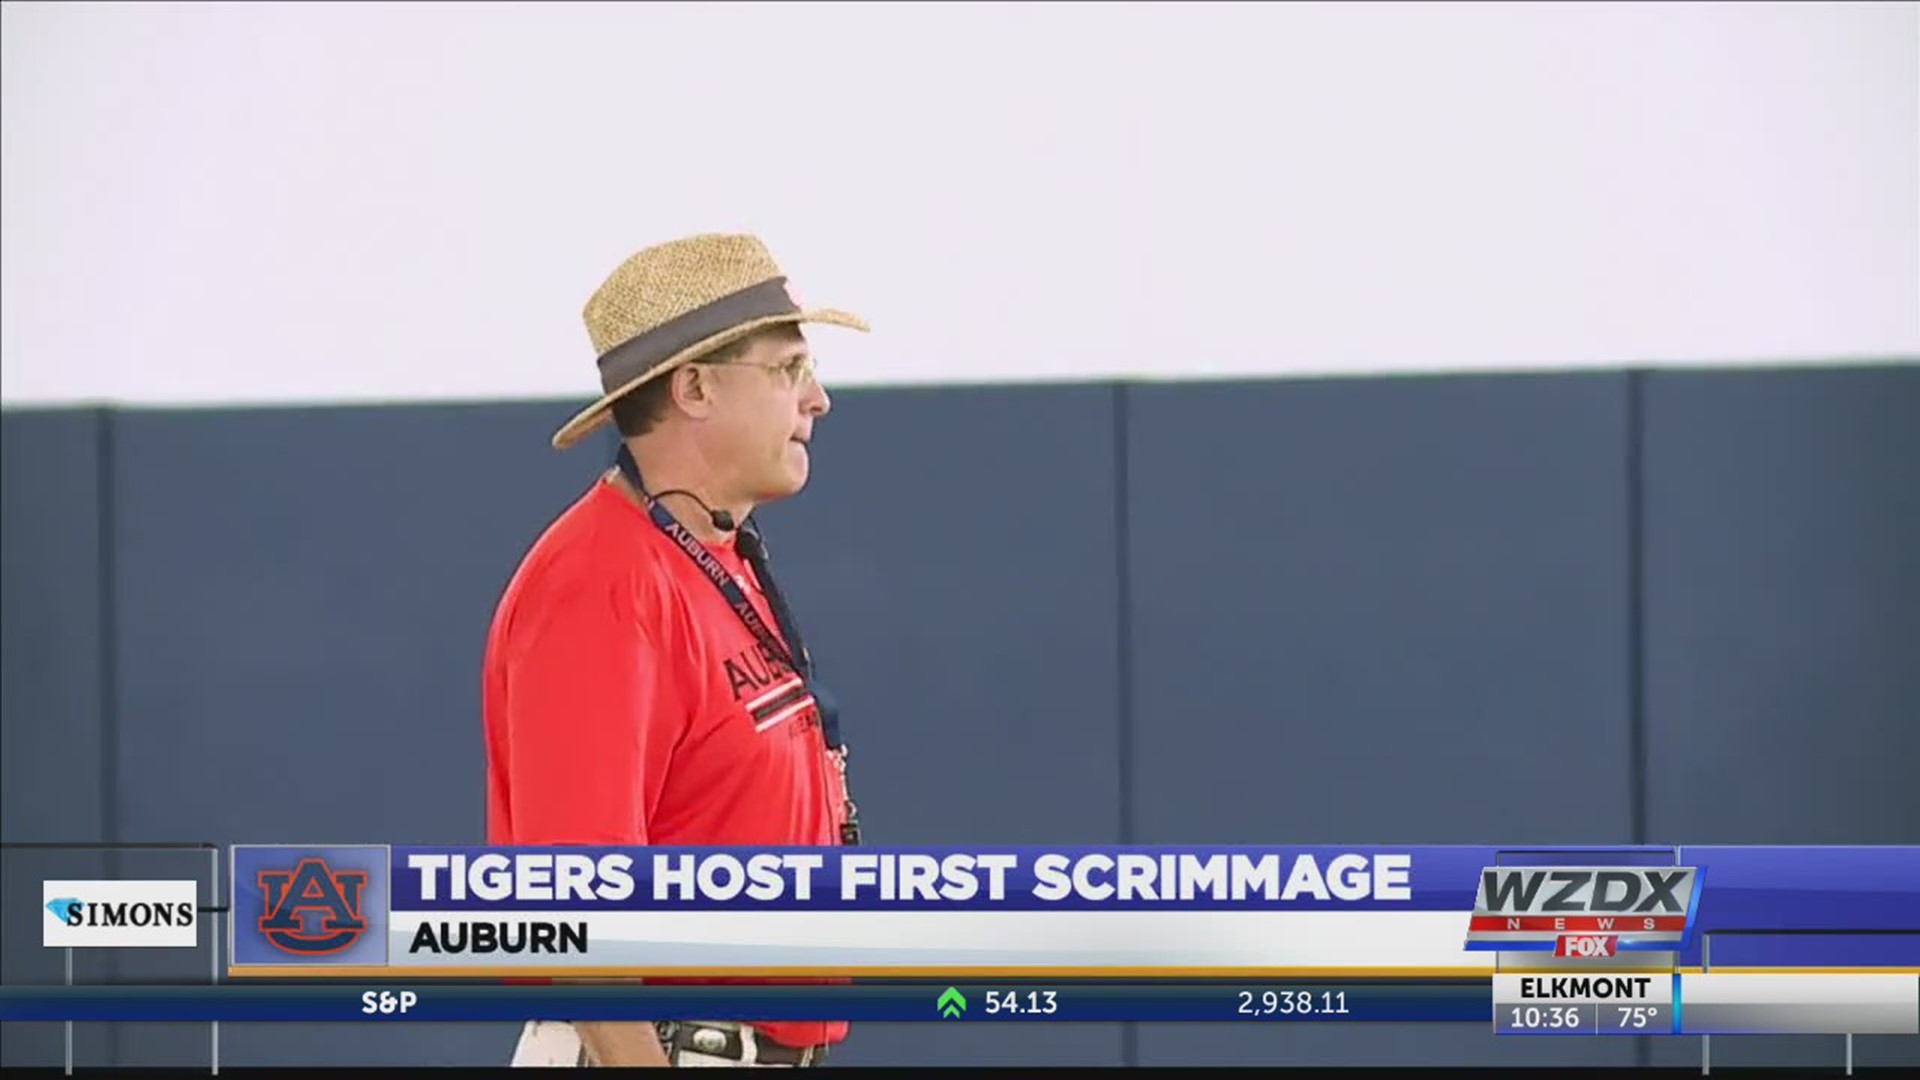 On a day when the heat index was in triple digits before the 84-play morning scrimmage was complete, the Auburn Tigers put the first full-squad scrimmage on video at Jordan-Hare Stadium with quarterbacks Joey Gatewood and Bo Nix splitting reps with the first team offense